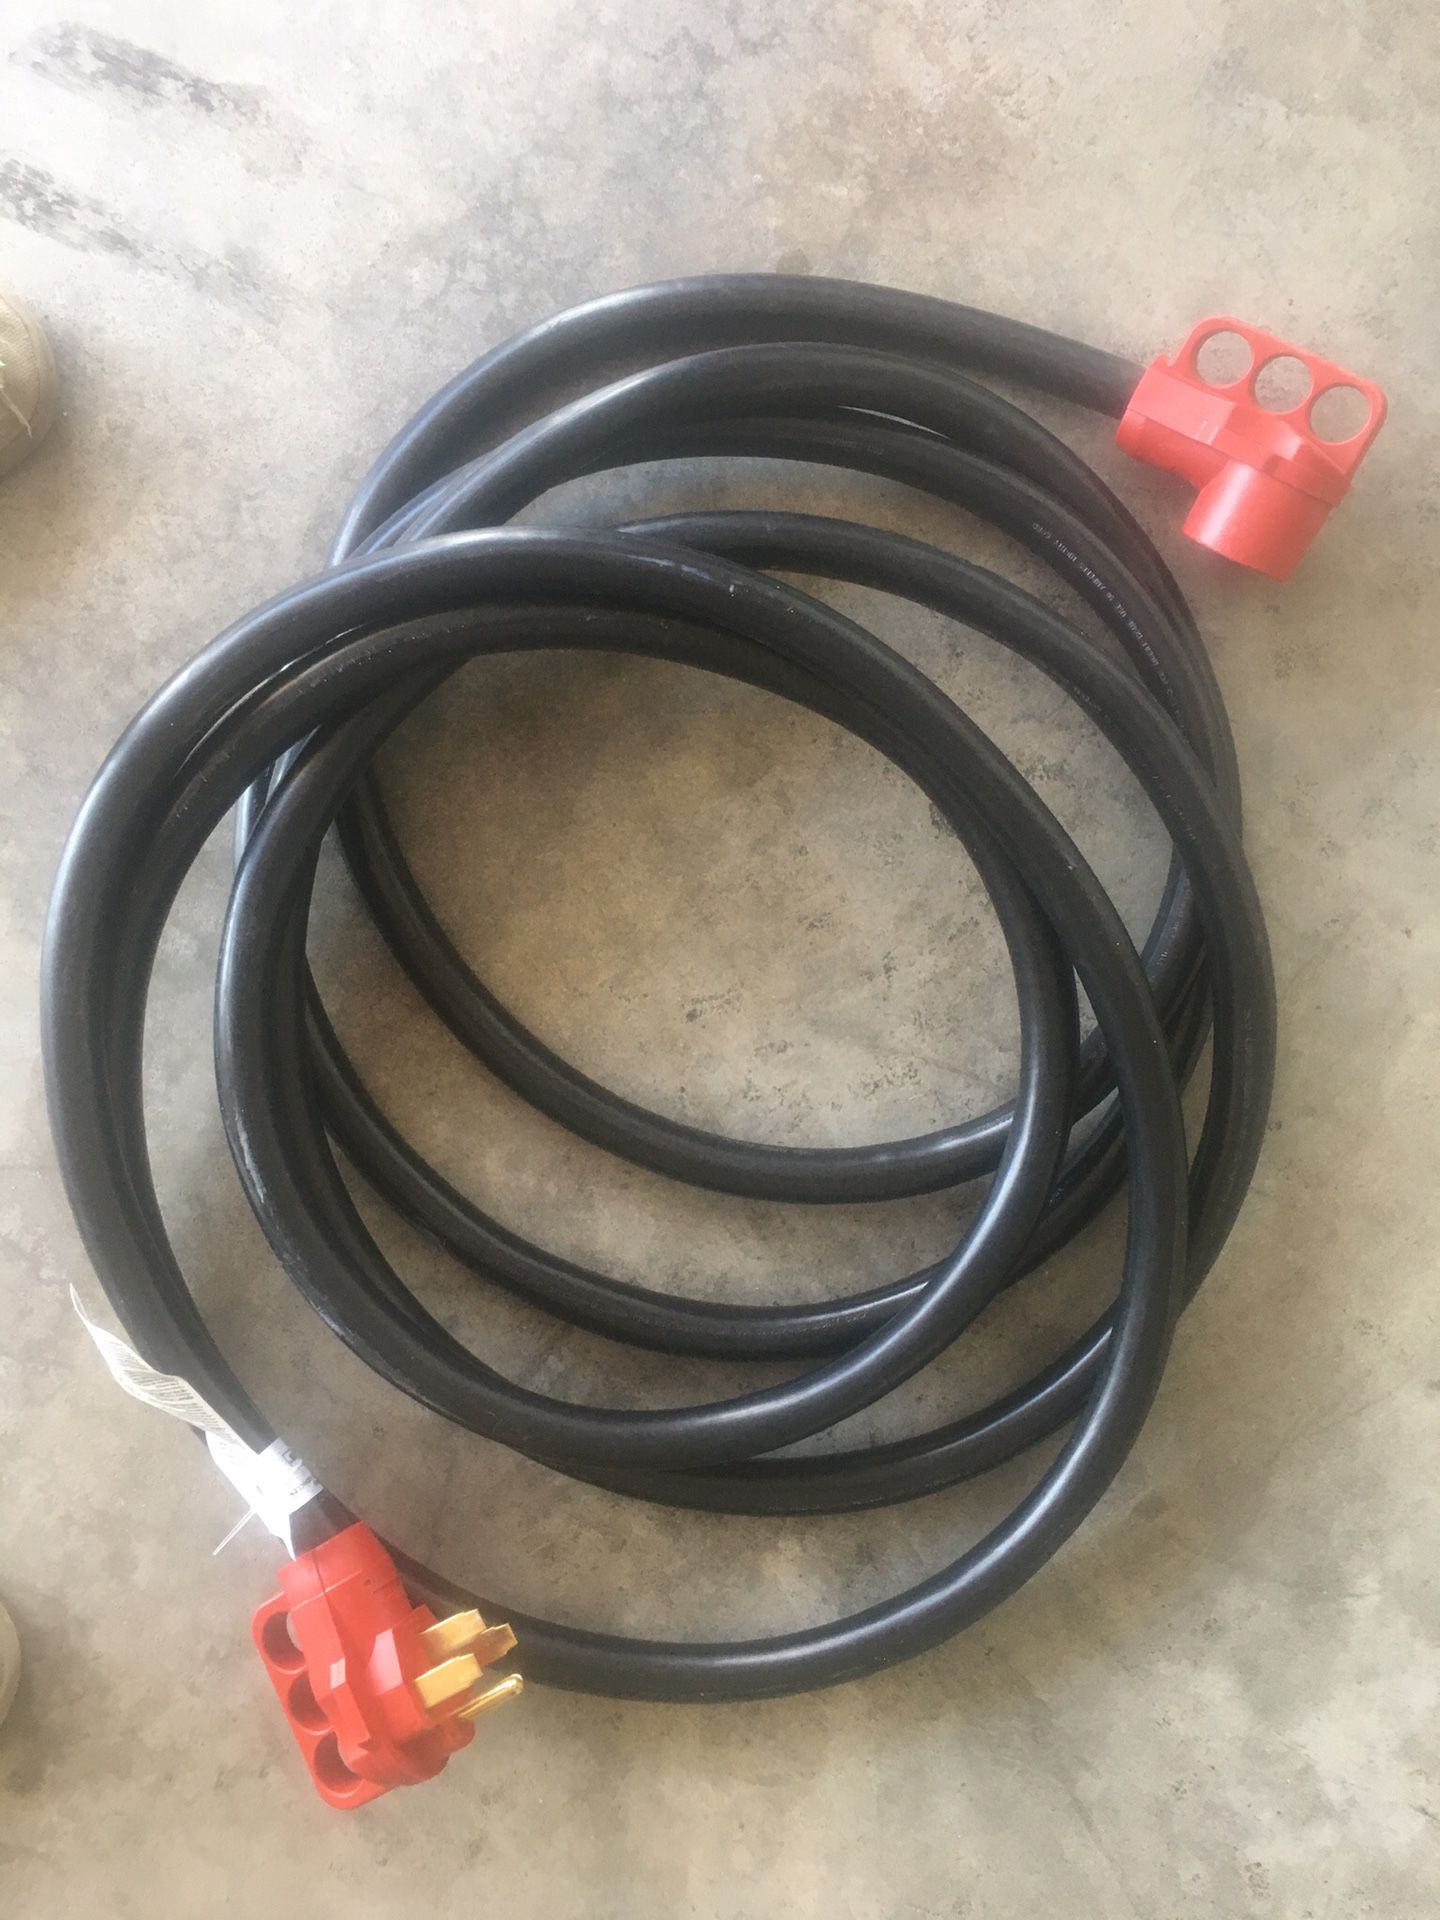 Photo RV 50 amp 25 foot extension cord